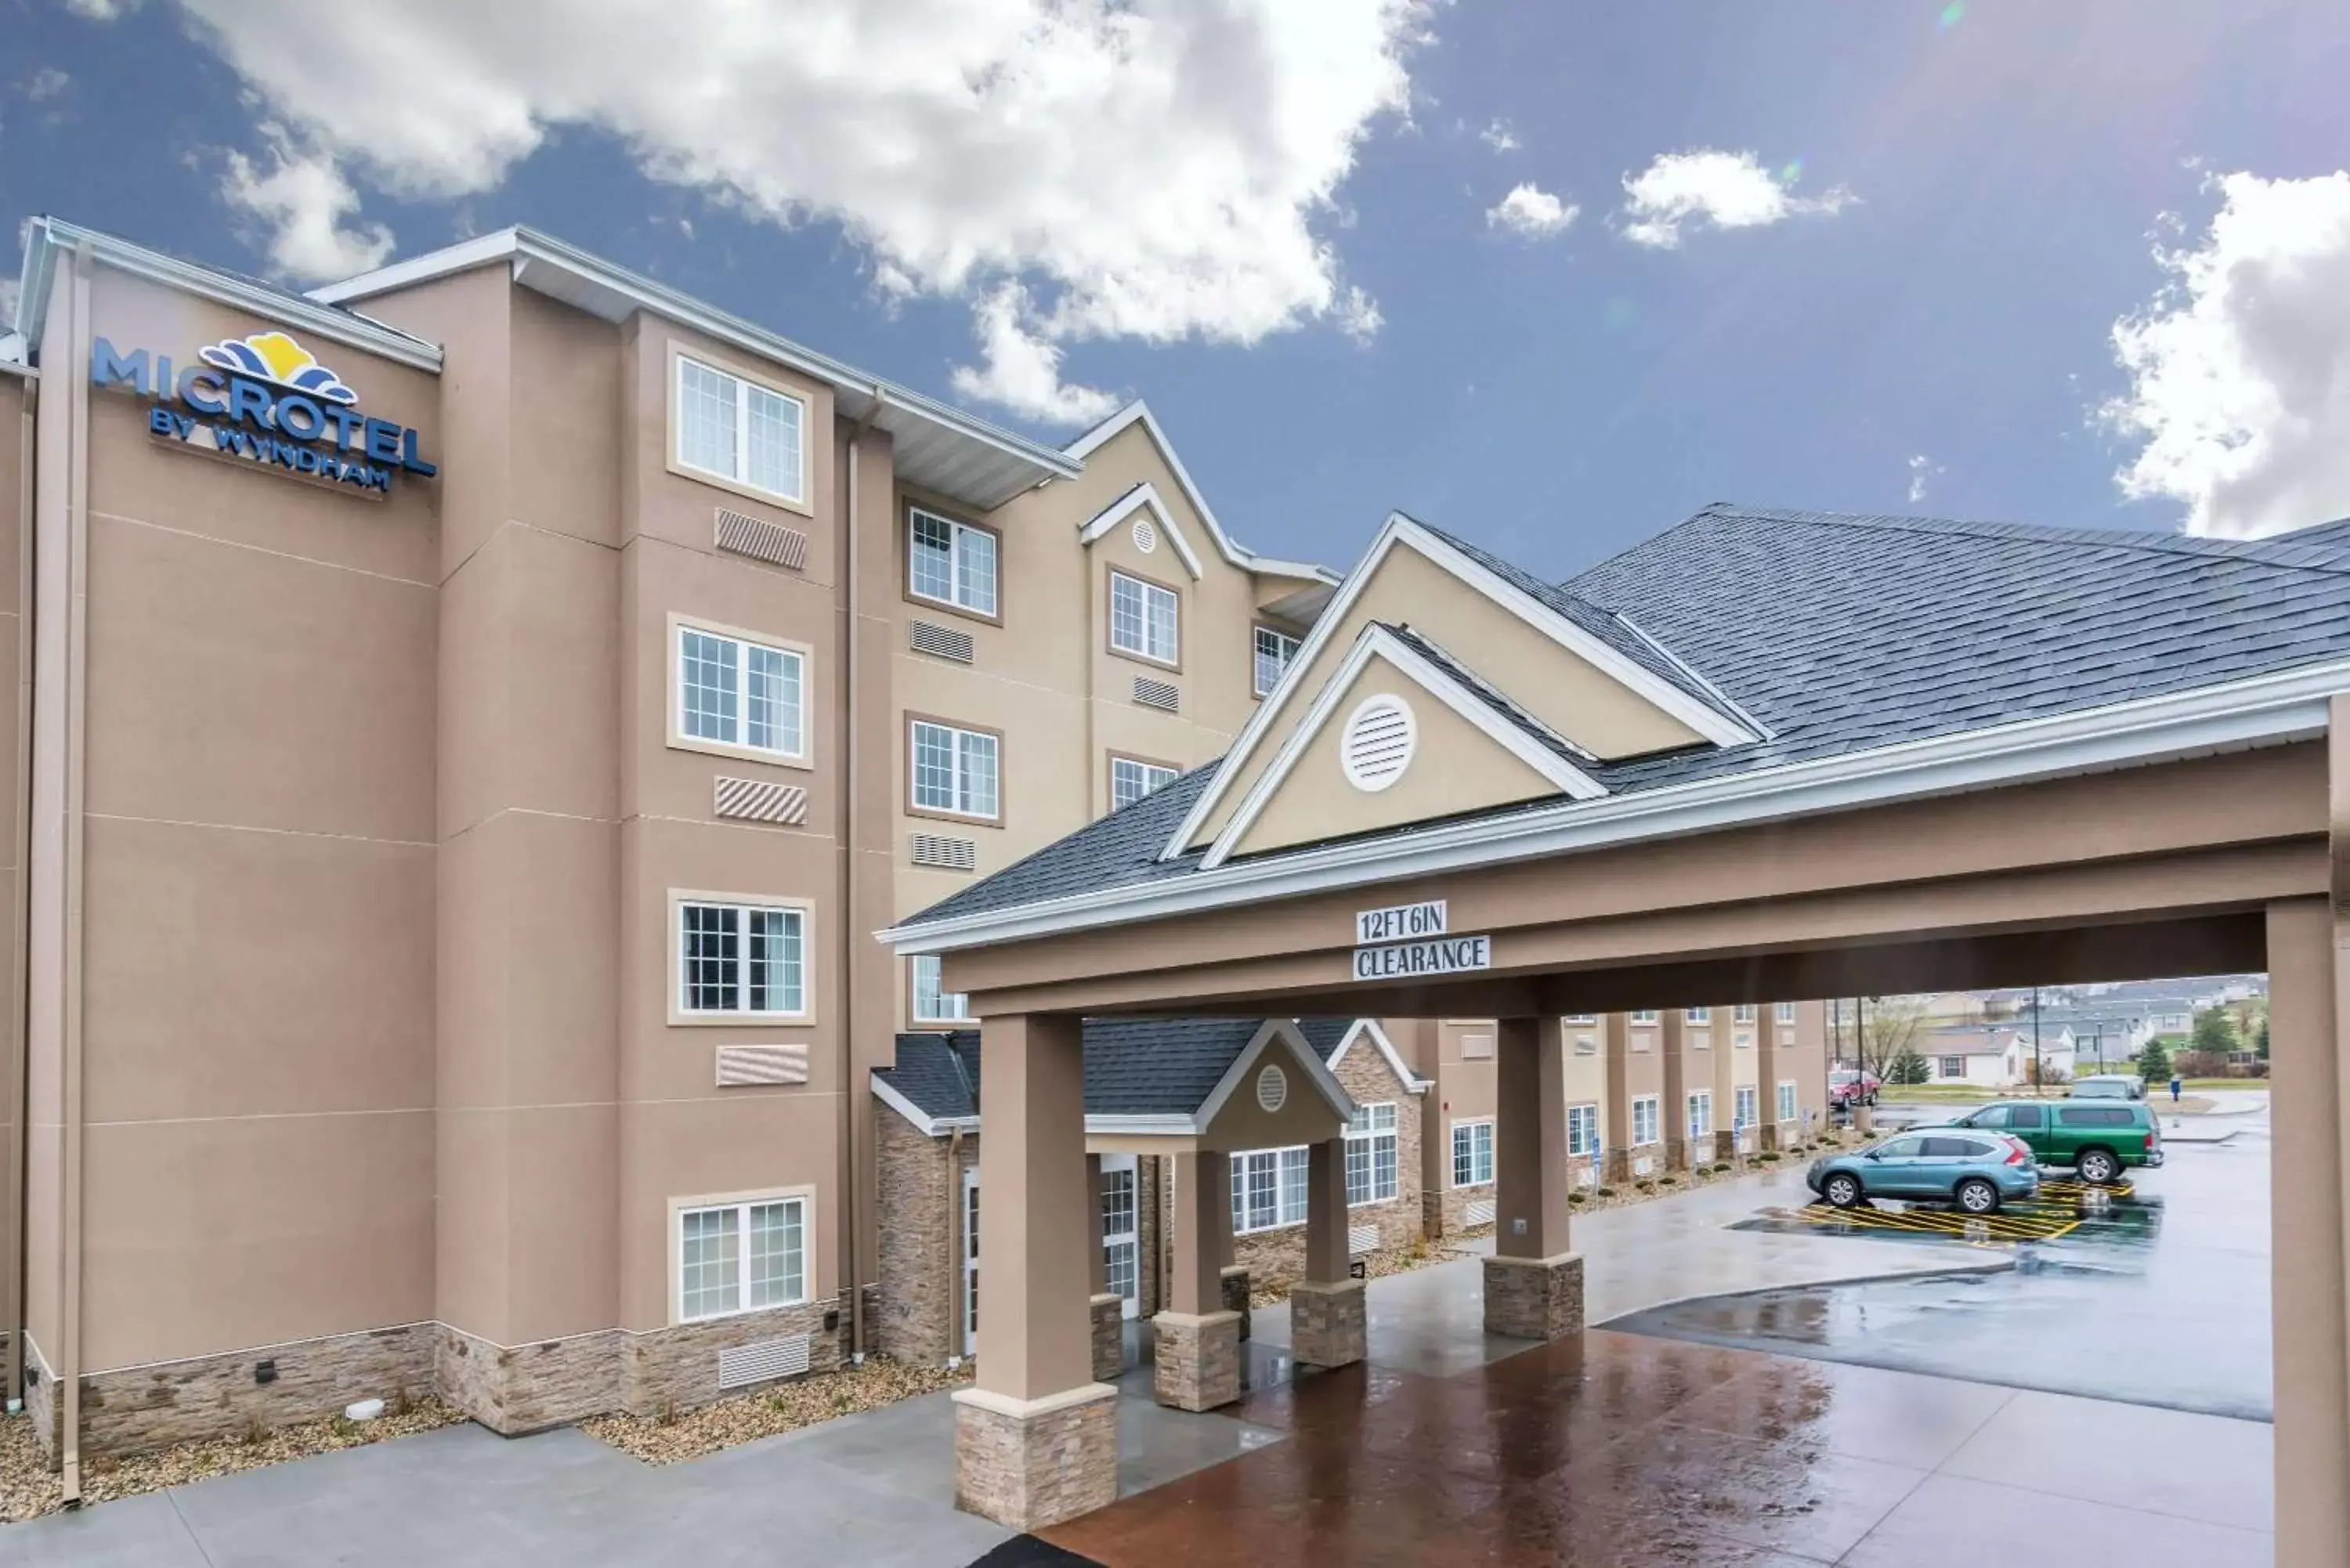 Property building in Microtel Inn & Suites by Wyndham Rochester South Mayo Clinic